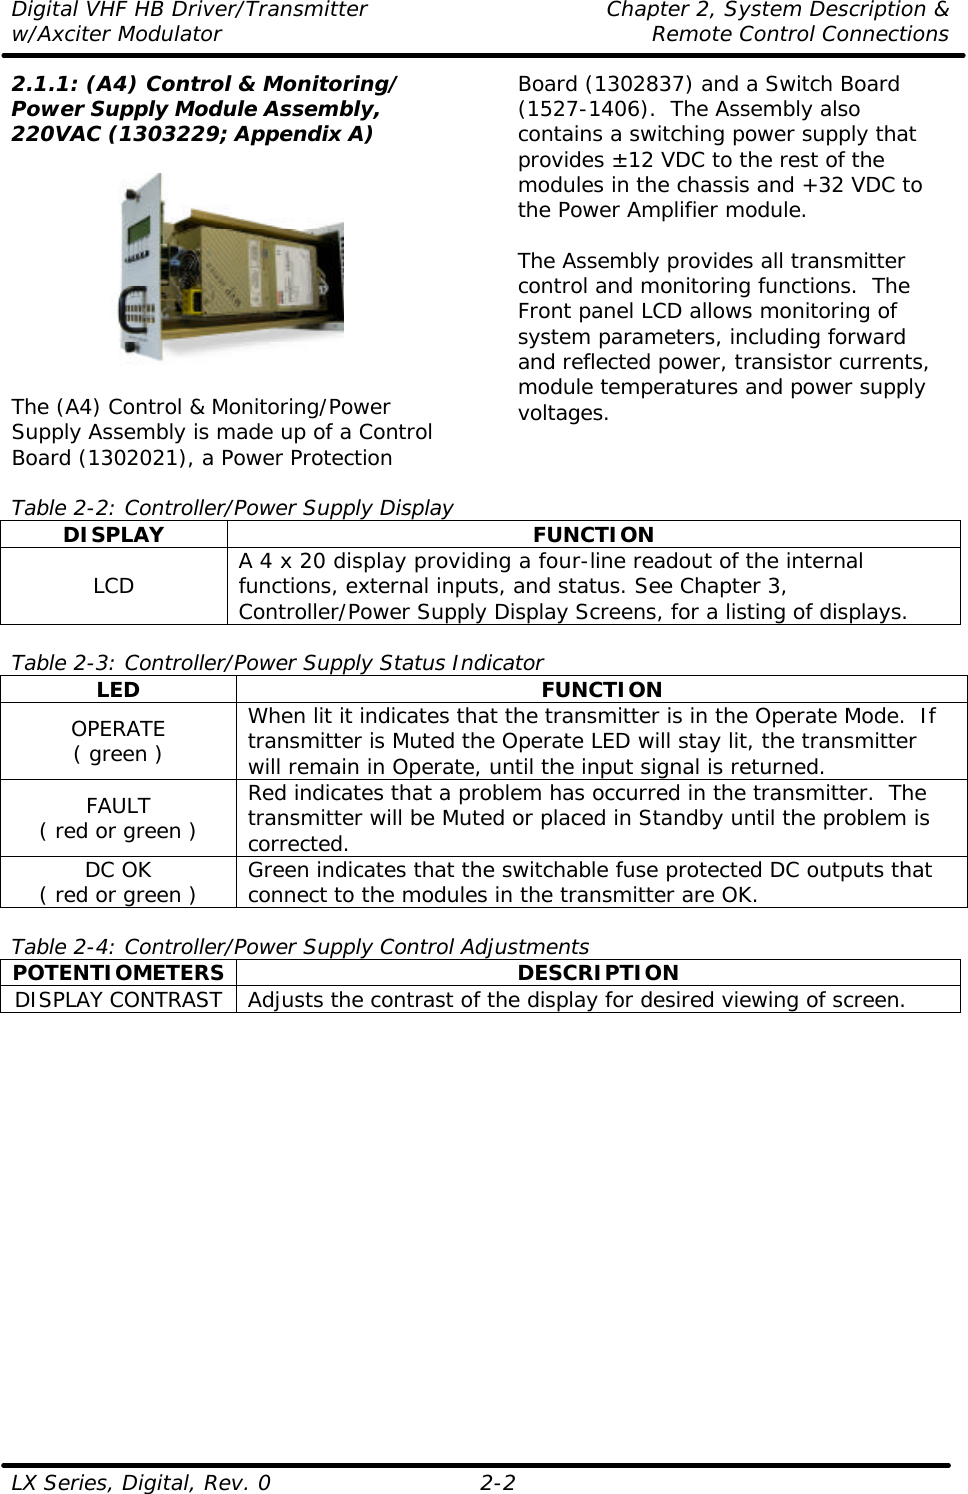 Digital VHF HB Driver/Transmitter Chapter 2, System Description &amp; w/Axciter Modulator Remote Control Connections LX Series, Digital, Rev. 0    2-2 2.1.1: (A4) Control &amp; Monitoring/ Power Supply Module Assembly, 220VAC (1303229; Appendix A)    The (A4) Control &amp; Monitoring/Power Supply Assembly is made up of a Control Board (1302021), a Power Protection Board (1302837) and a Switch Board (1527-1406).  The Assembly also contains a switching power supply that provides ±12 VDC to the rest of the modules in the chassis and +32 VDC to the Power Amplifier module.  The Assembly provides all transmitter control and monitoring functions.  The Front panel LCD allows monitoring of system parameters, including forward and reflected power, transistor currents, module temperatures and power supply voltages.   Table 2-2: Controller/Power Supply Display DISPLAY FUNCTION LCD A 4 x 20 display providing a four-line readout of the internal functions, external inputs, and status. See Chapter 3, Controller/Power Supply Display Screens, for a listing of displays.  Table 2-3: Controller/Power Supply Status Indicator LED FUNCTION OPERATE ( green ) When lit it indicates that the transmitter is in the Operate Mode.  If transmitter is Muted the Operate LED will stay lit, the transmitter will remain in Operate, until the input signal is returned. FAULT ( red or green ) Red indicates that a problem has occurred in the transmitter.  The transmitter will be Muted or placed in Standby until the problem is corrected. DC OK ( red or green ) Green indicates that the switchable fuse protected DC outputs that connect to the modules in the transmitter are OK.  Table 2-4: Controller/Power Supply Control Adjustments POTENTIOMETERS DESCRIPTION DISPLAY CONTRAST Adjusts the contrast of the display for desired viewing of screen.  